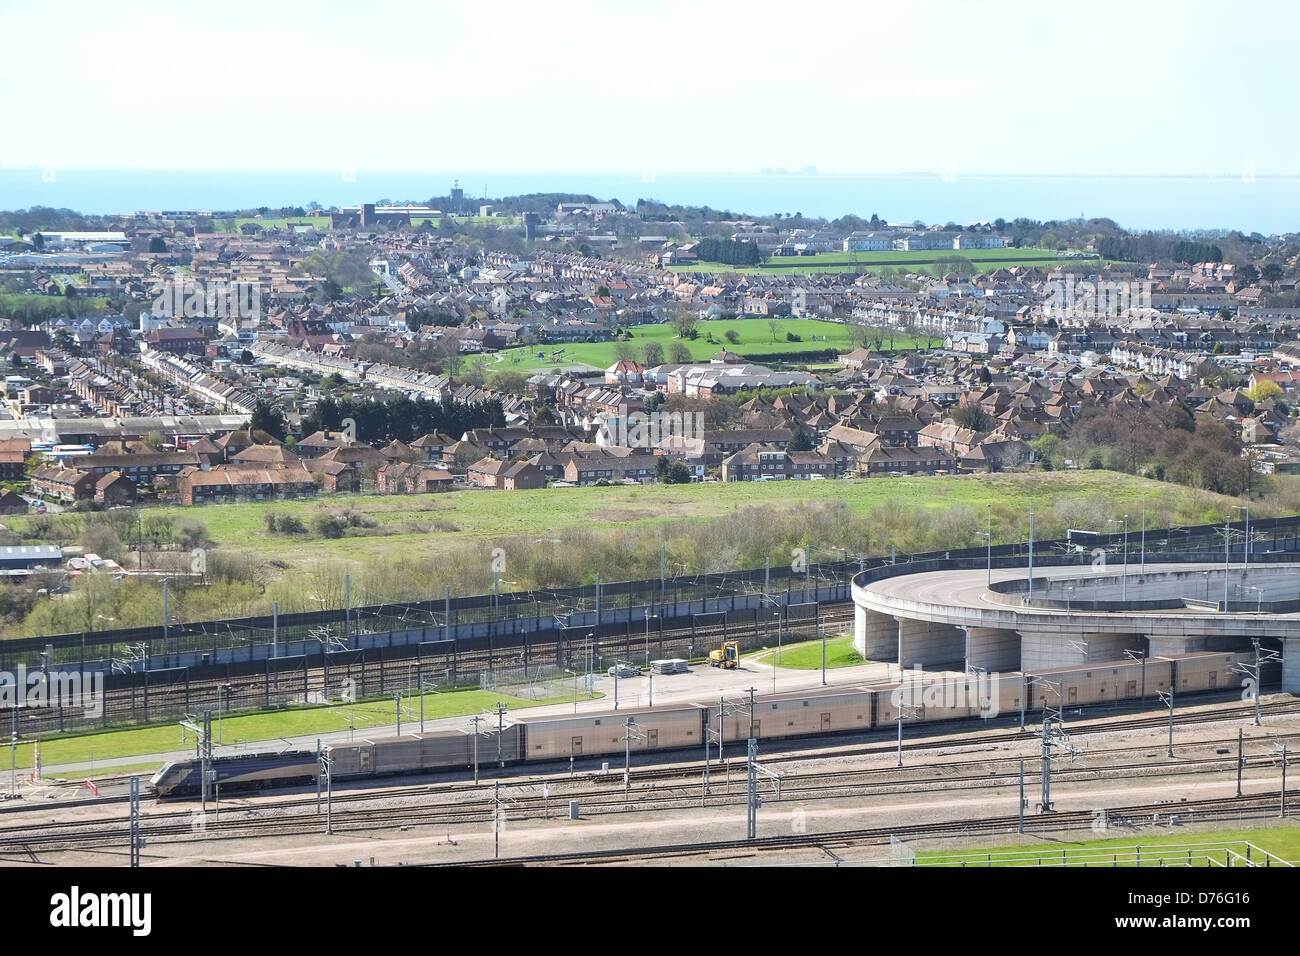 Image of a Channel Tunnel train leaving the Folkestone terminal en-route to Calais in France. Stock Photo